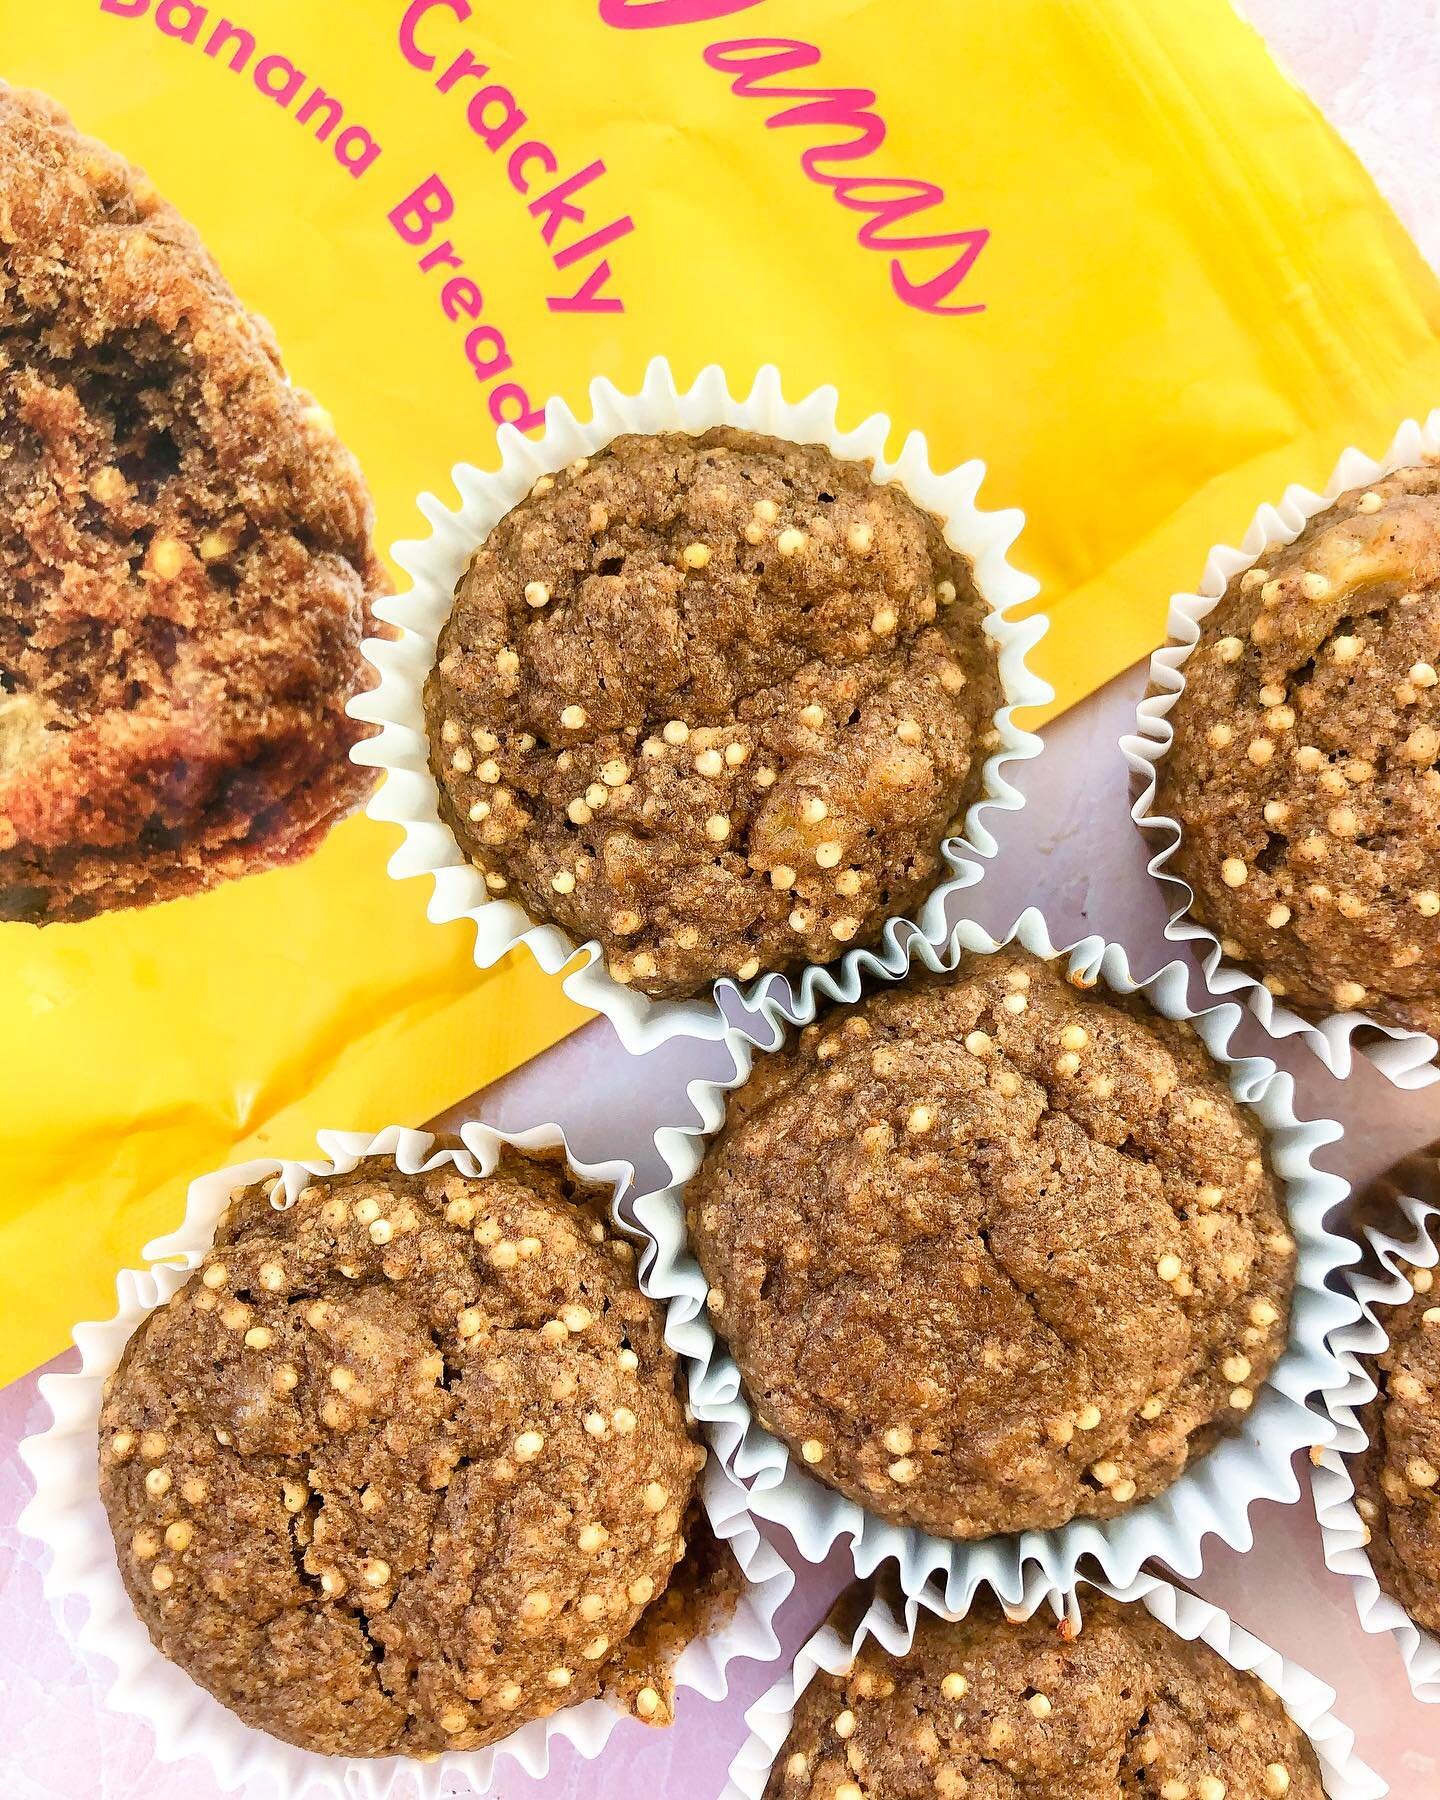 Showing some MAJOR appreciation for truly one of my favorite products I&rsquo;ve been using the past few months: @go_nanas banana bread mixes!!!!! 

They&rsquo;re so easy and bring allll the banana bread flavor, and not to mention @go_nanas is a wome